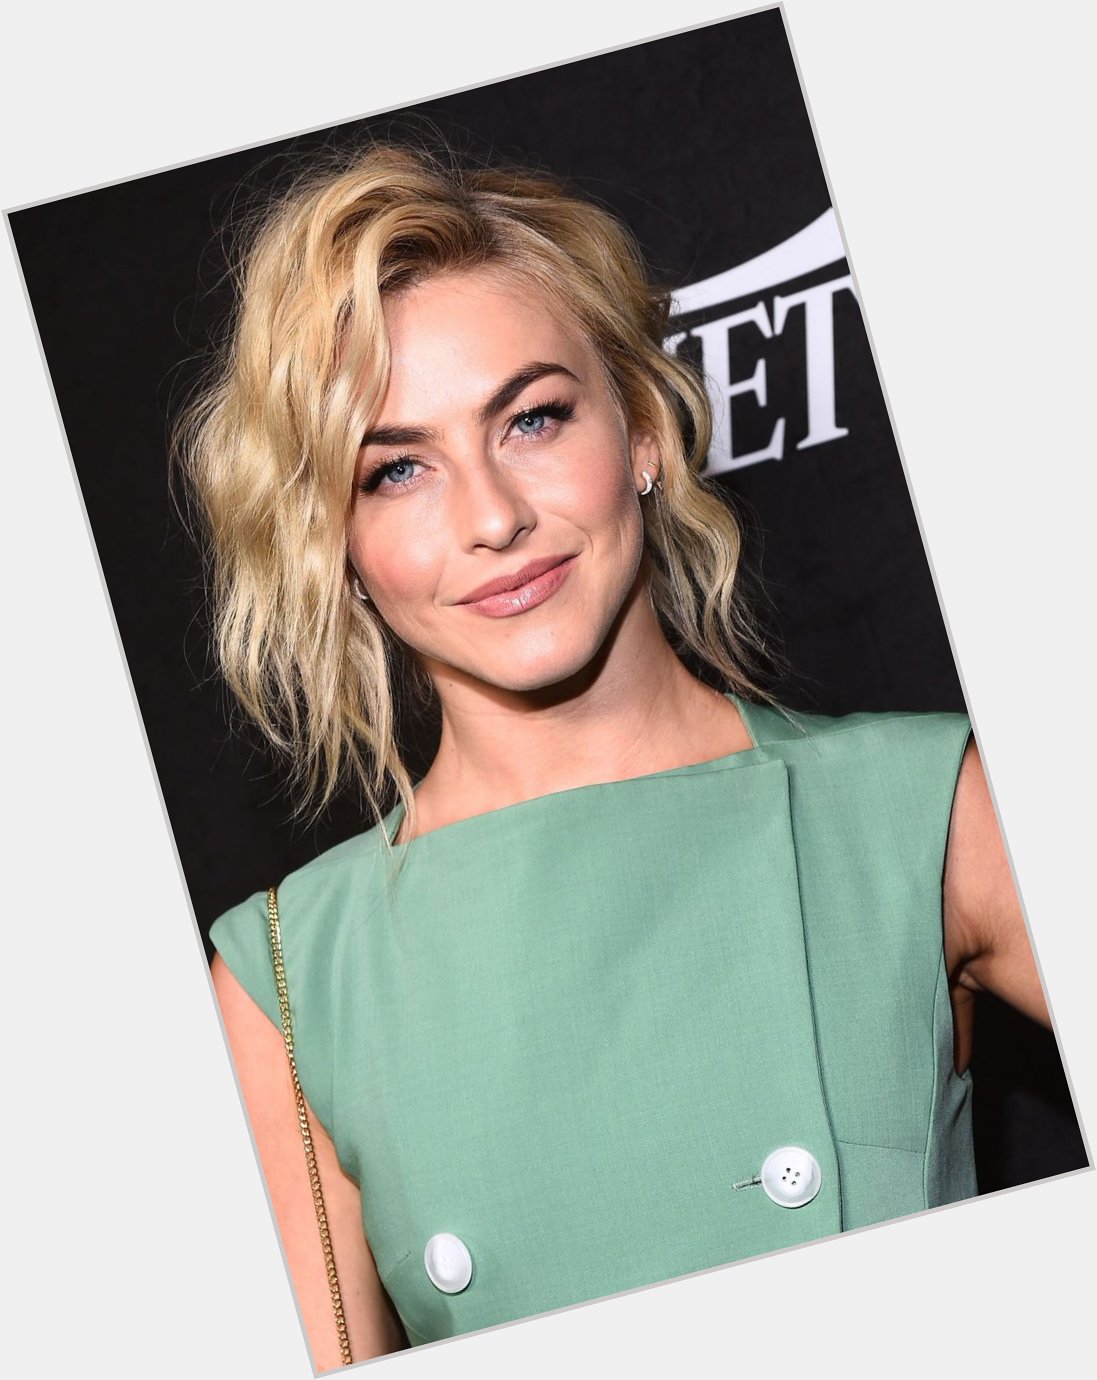 Happy 33rd Birthday Shout Out to the lovely Julianne Hough. 